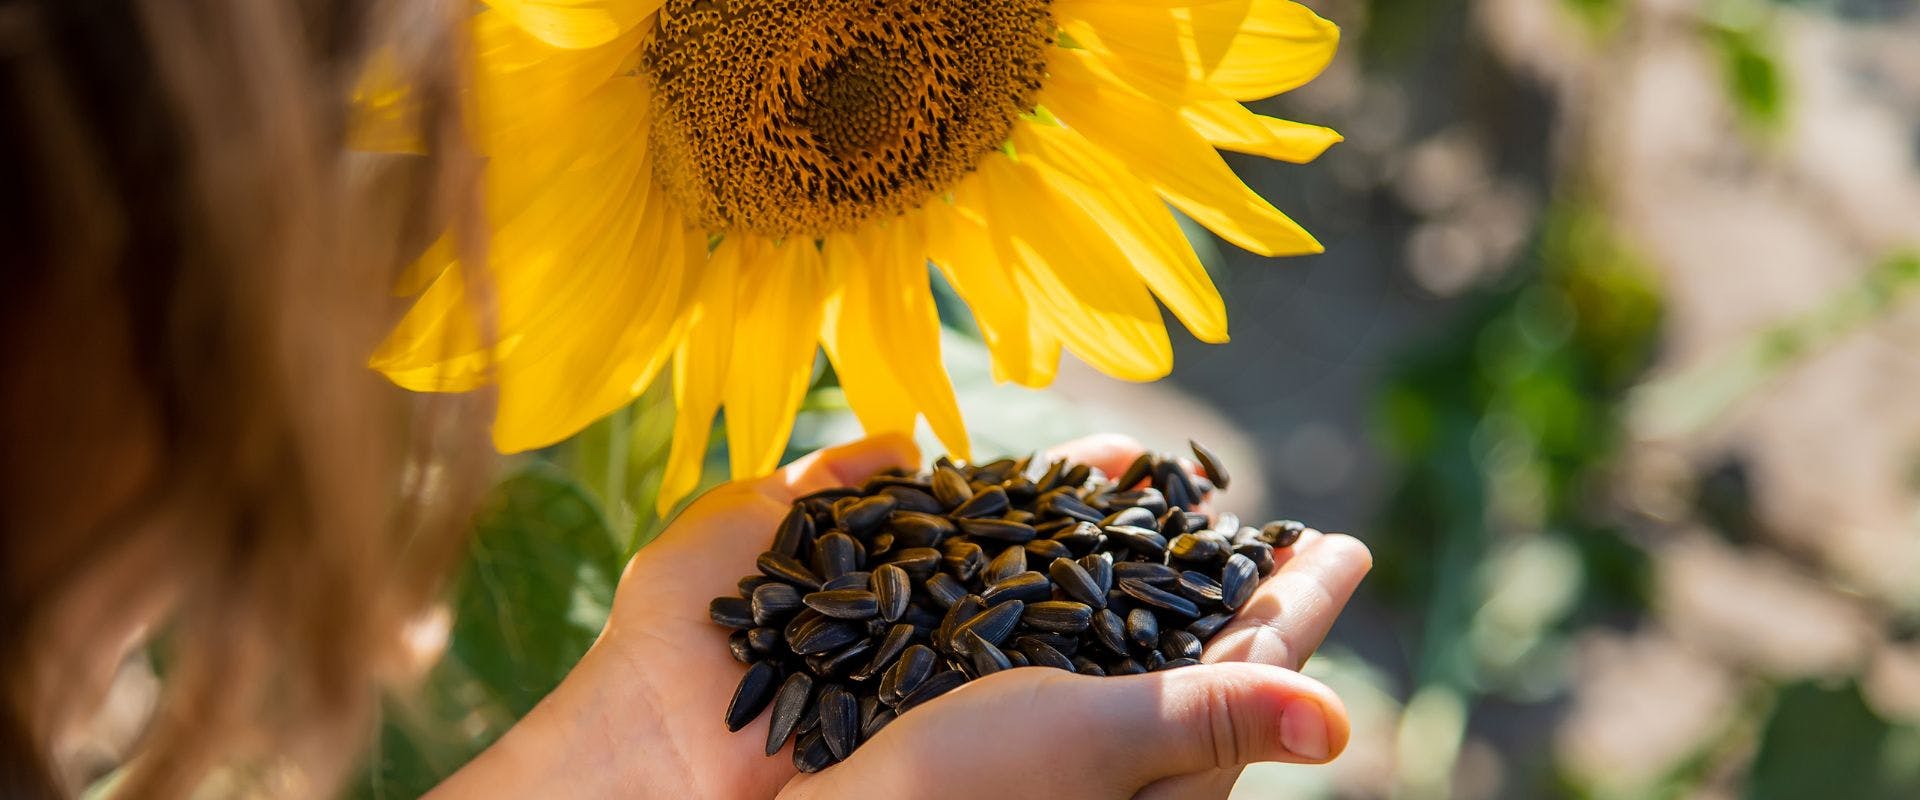 Person holding sunflower seeds with a sunflower in the background